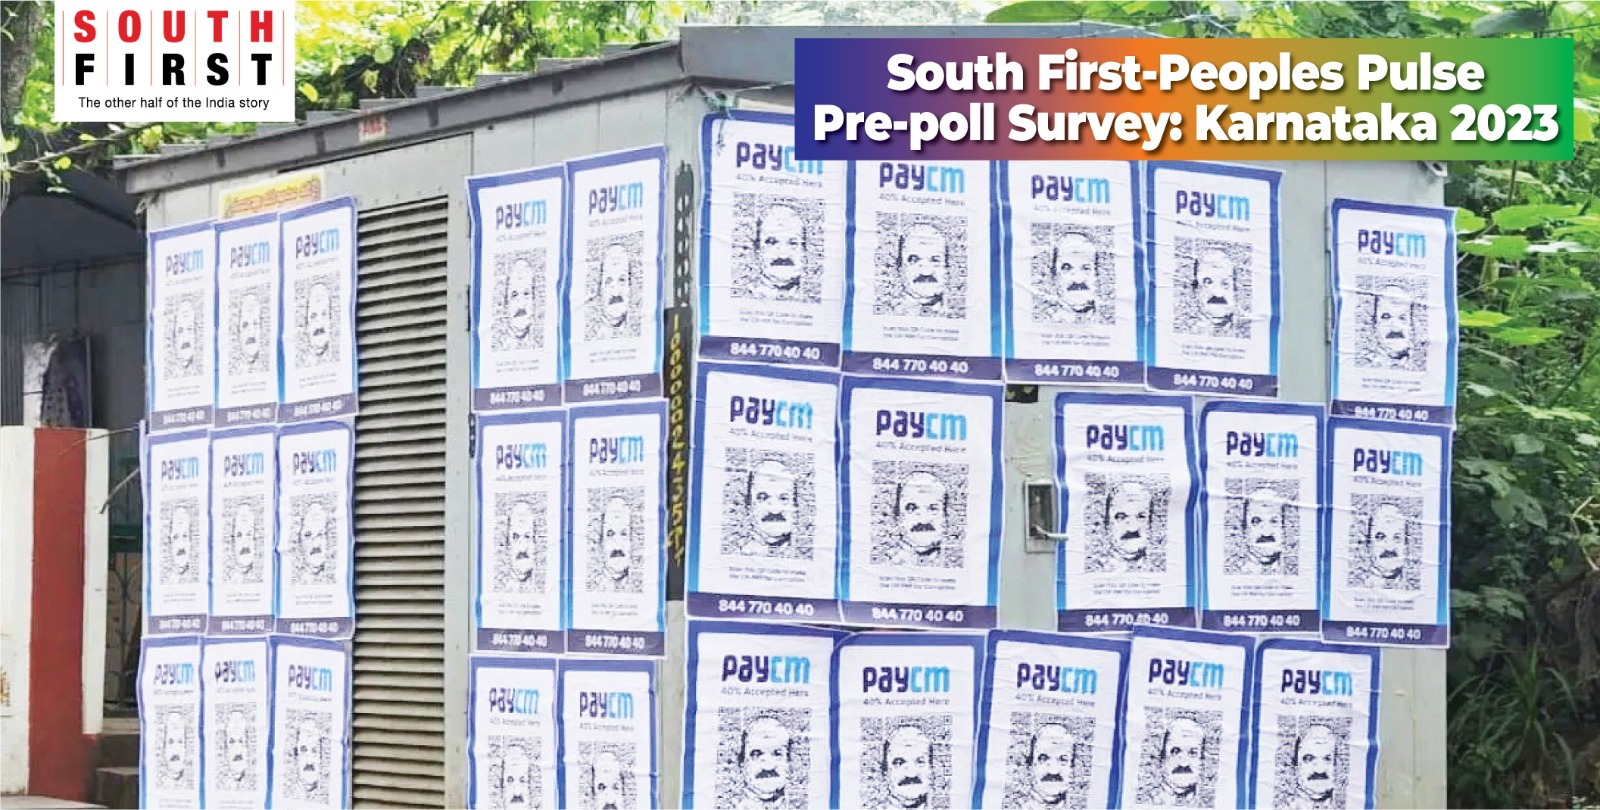 South First Karnataka pre-poll survey: Price rise, corruption top ‘problems’ for voters